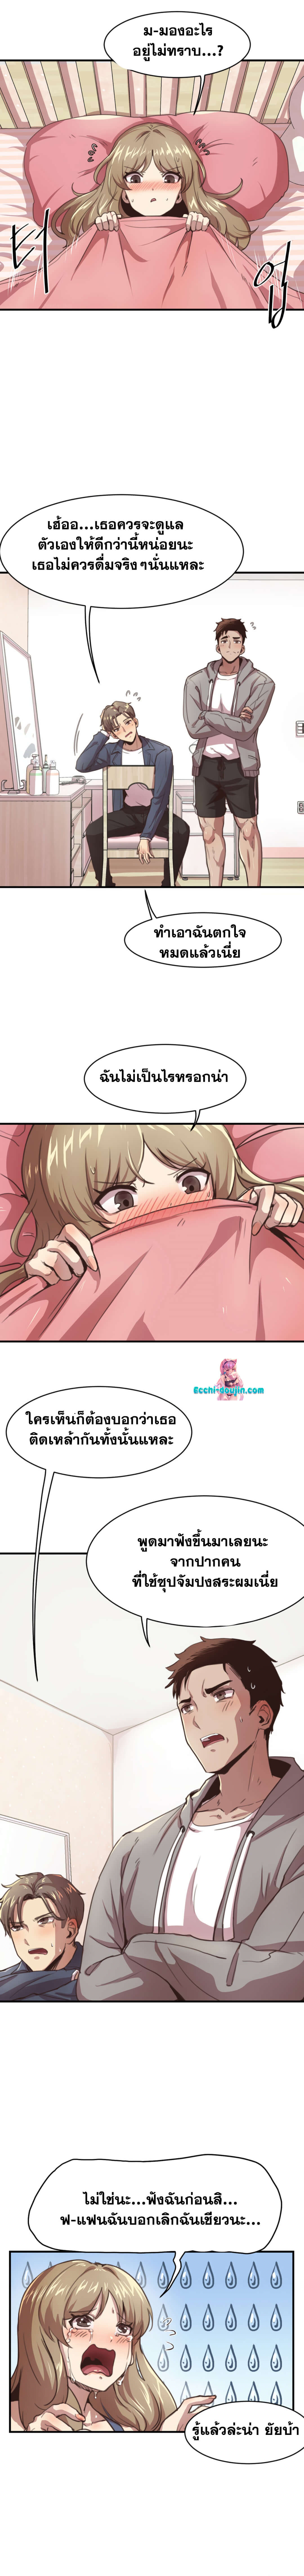 With My Brother’s Friends ตอนที่ 2 ภาพ 2